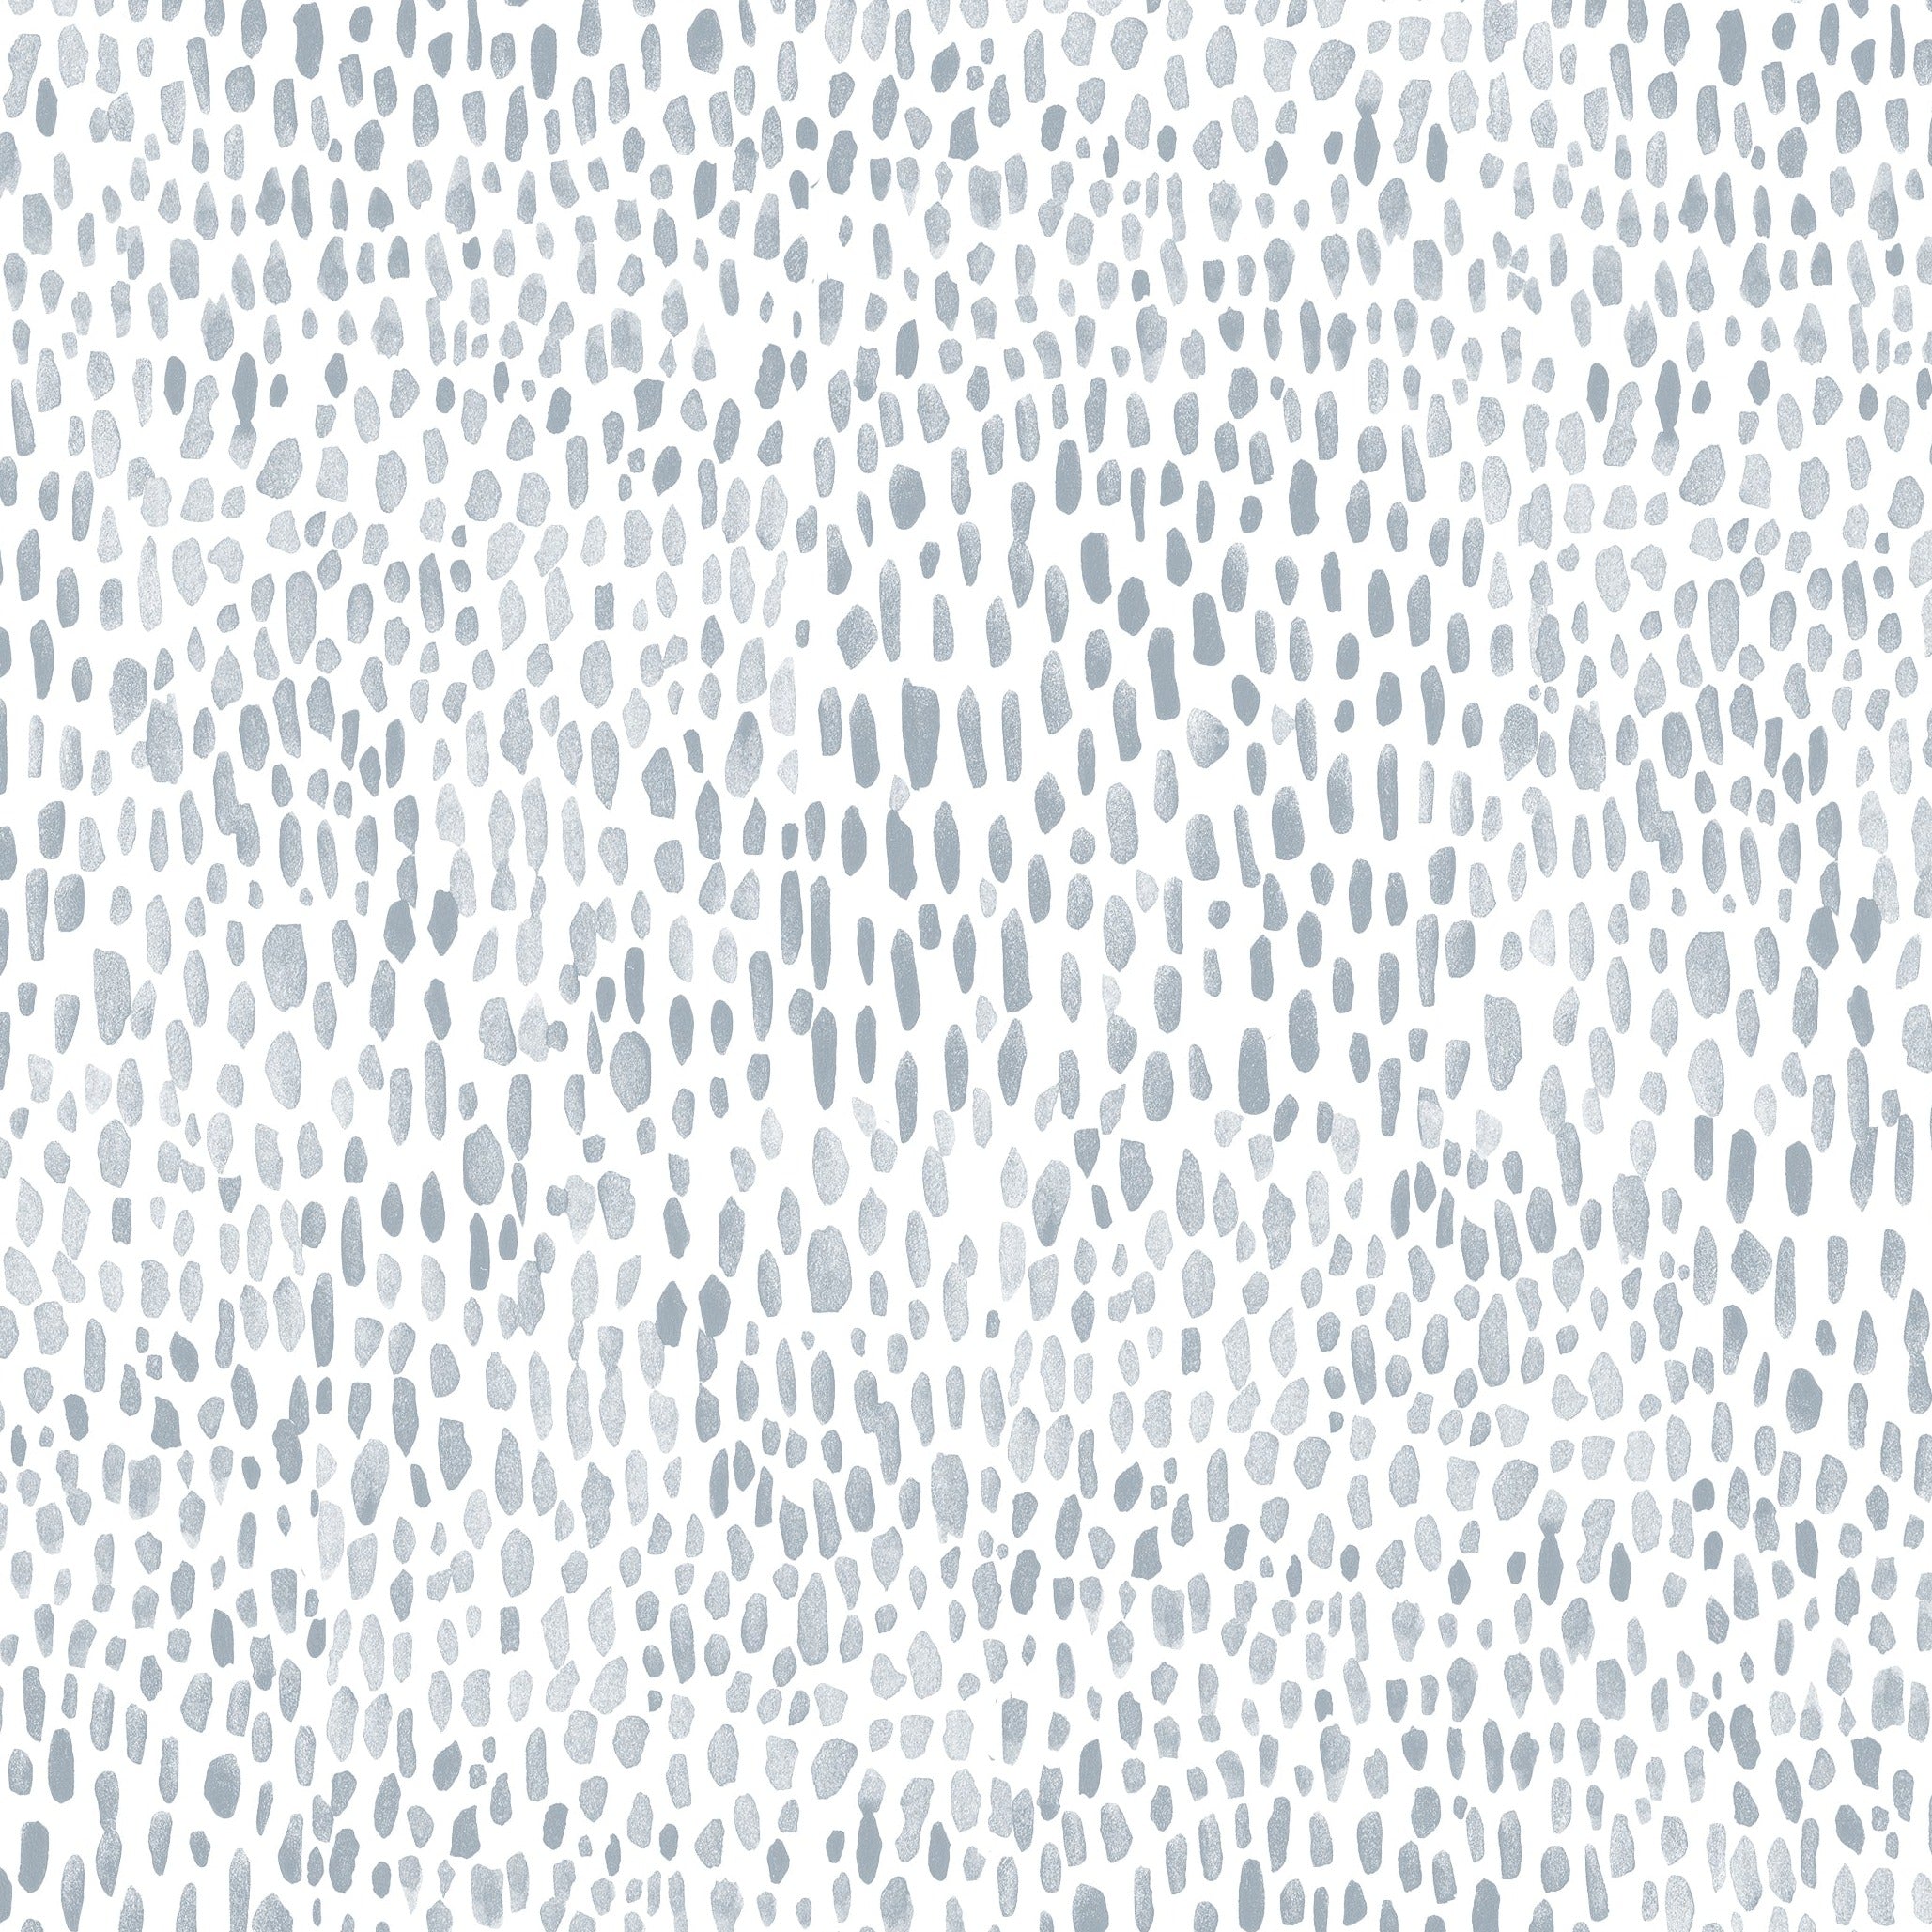 A detailed view of 'Big Boho Hand Painted Dots Wallpaper' showing a pattern of irregular hand-painted dots in shades of pale blue on a white background, giving off a playful and artistic vibe.